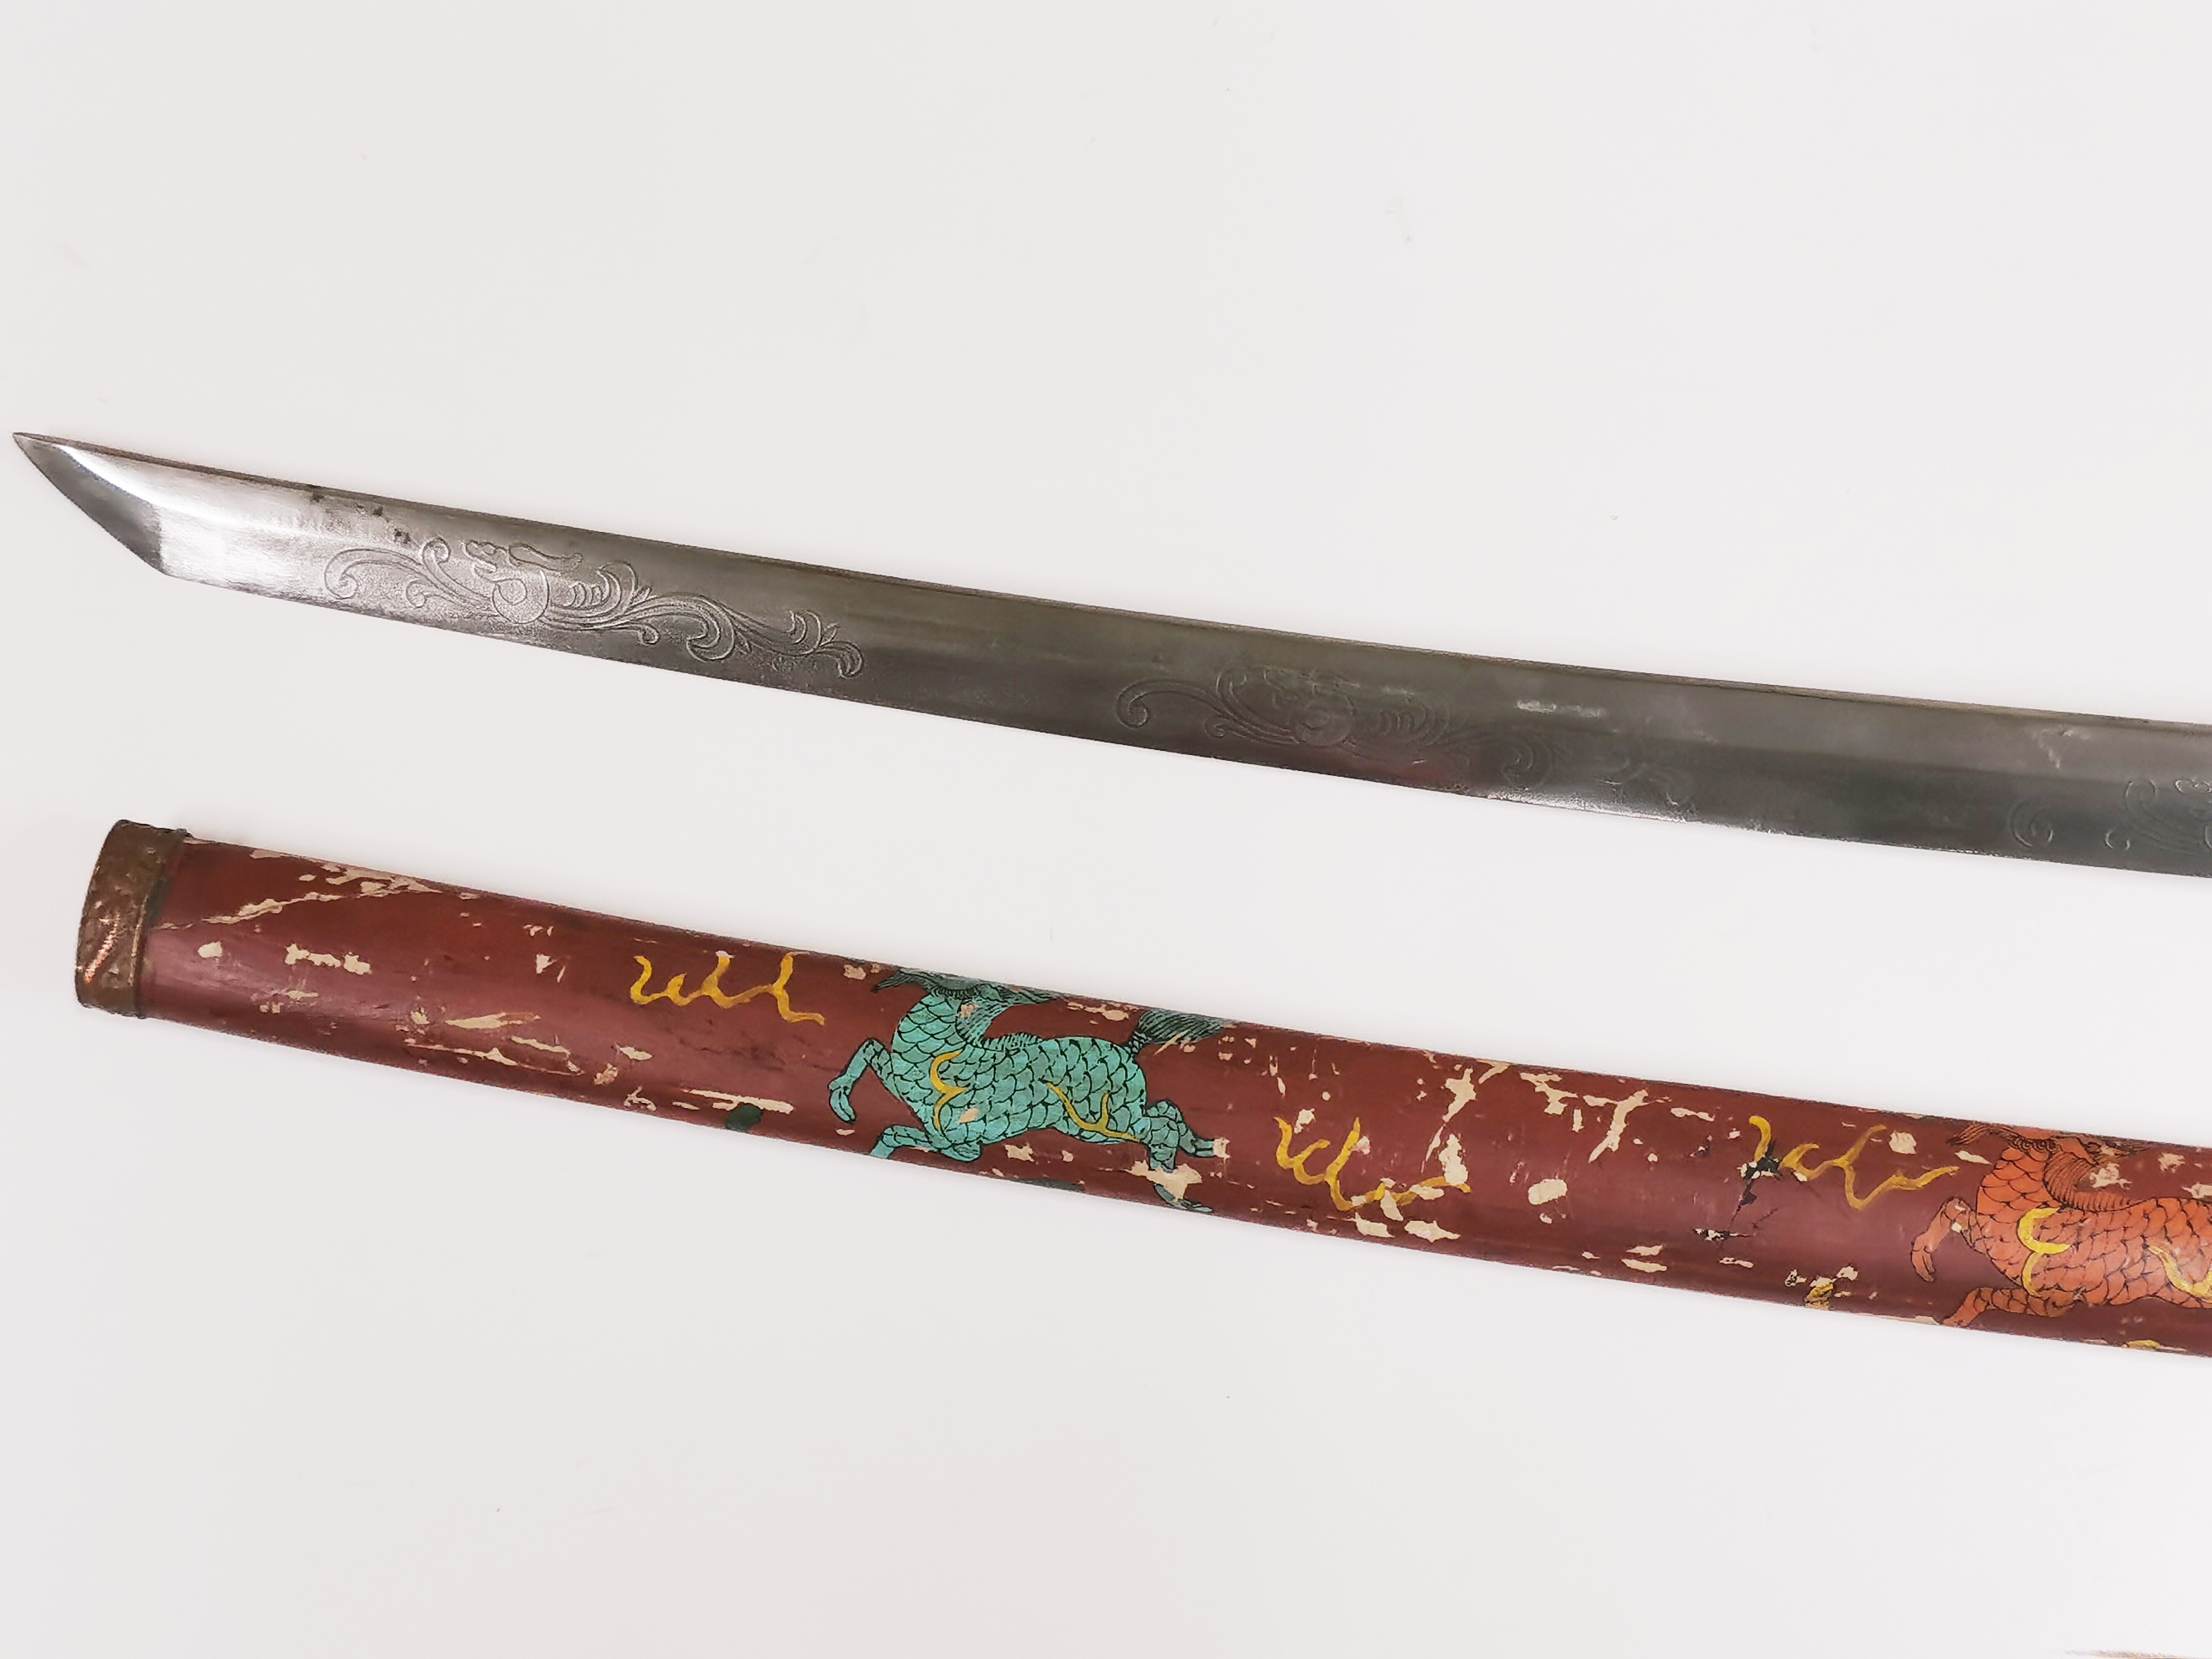 A 20thC Japanese style katana sword with painted saya, ray skin hilt and a bronze tsuba and - Image 3 of 4